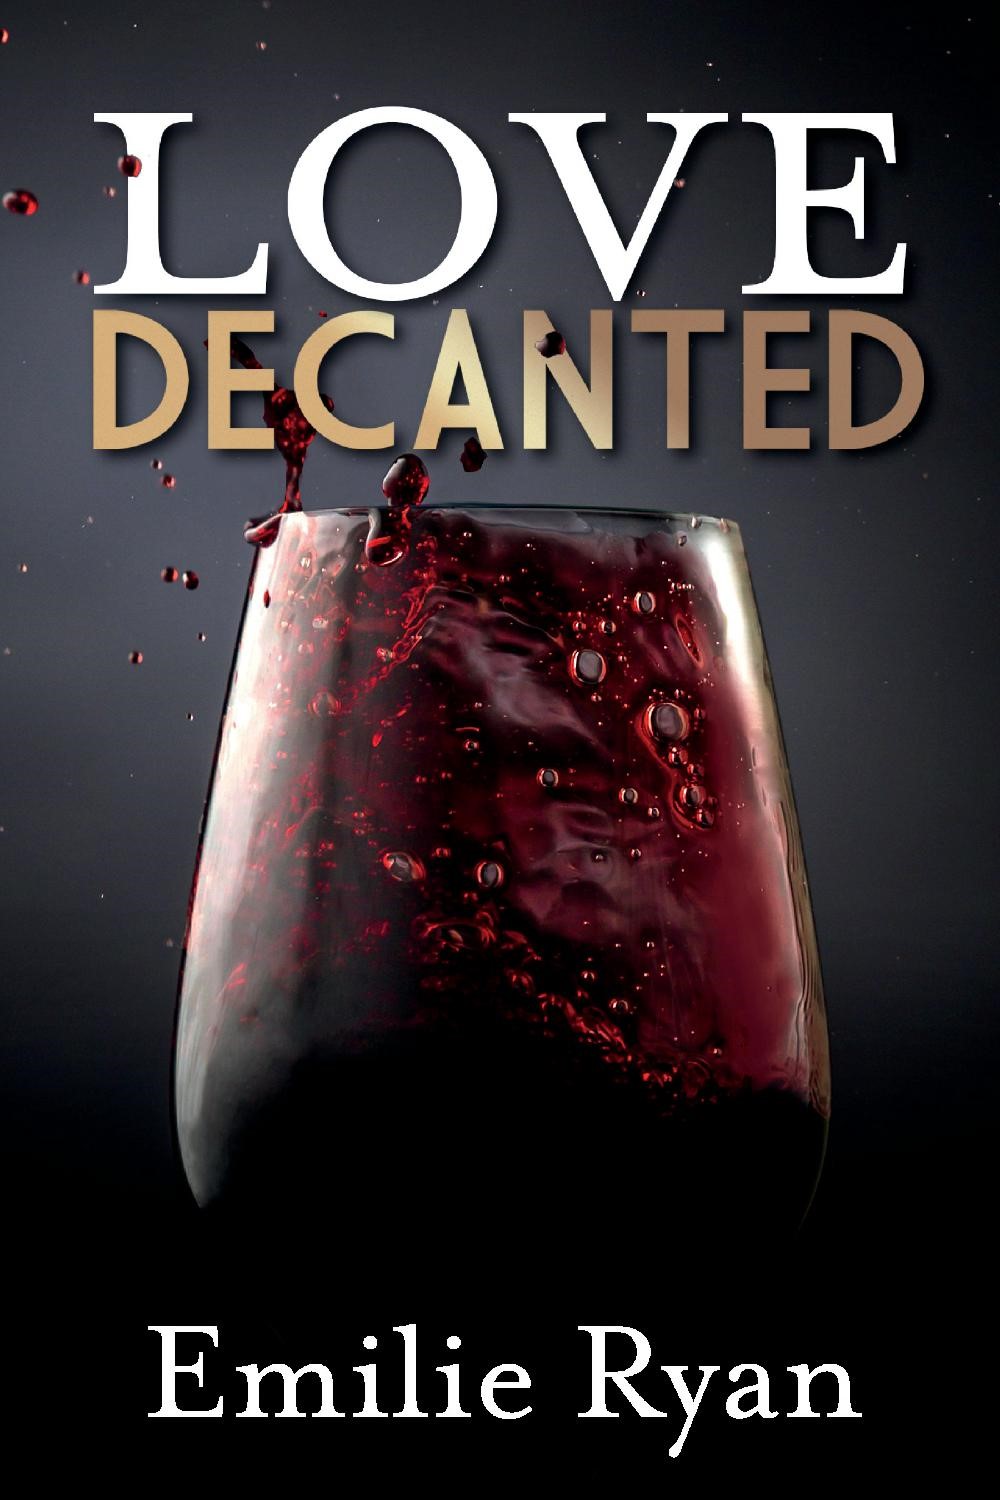 Love Decanted book cover by Emilie Ryan shows swirling red wine in a glass on a dark grey-to-black background. Some of the wine is splattering out.